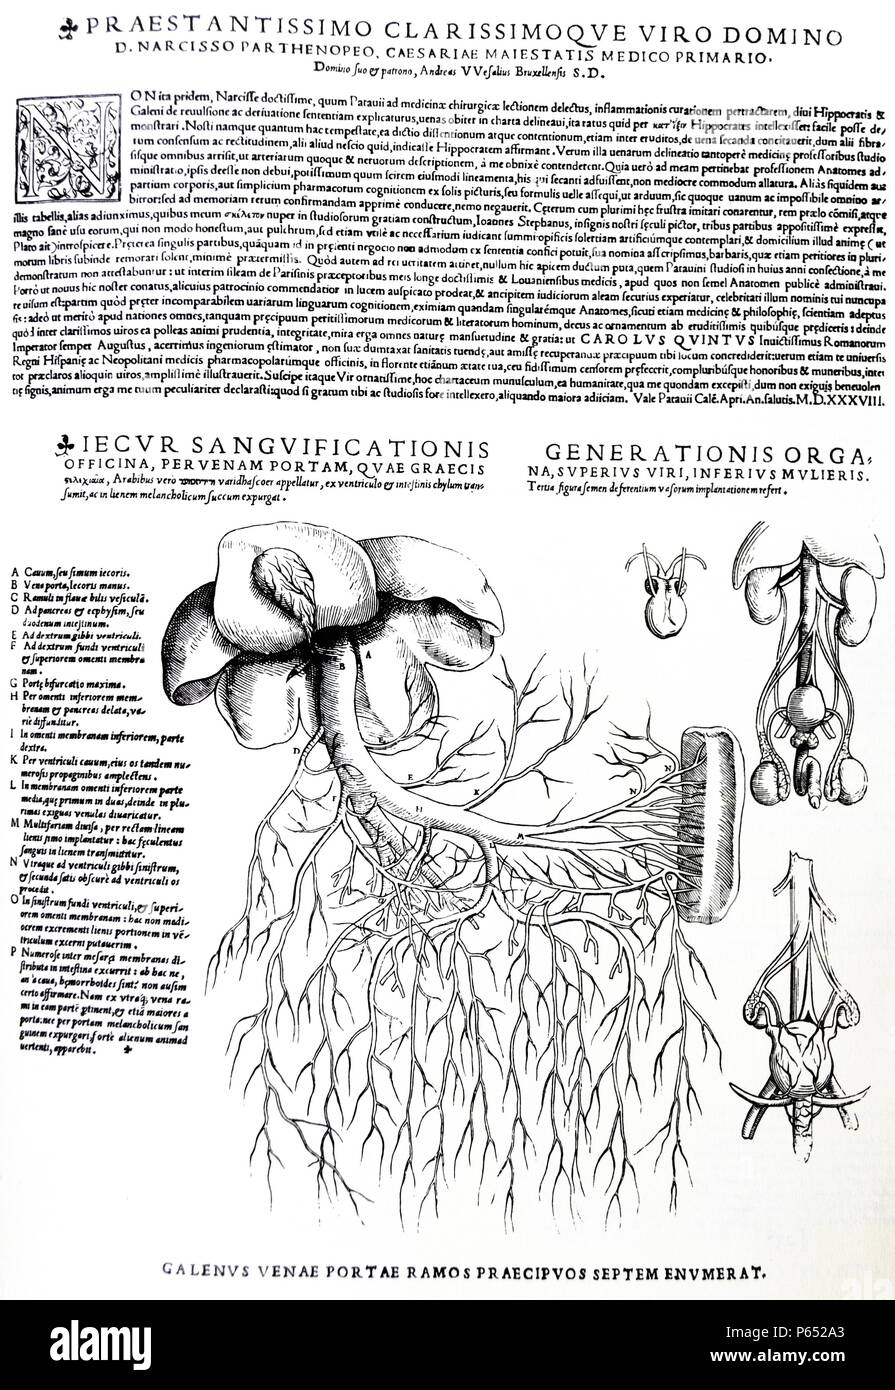 The Plates from the Epitome of the De Humani Corporis Fabrica by Andreas Vesalius, (1514-1564) Plate 89 - diagram showing the male and female reproduction systems (right);diagram showing the liver with venous system (left). Stock Photo